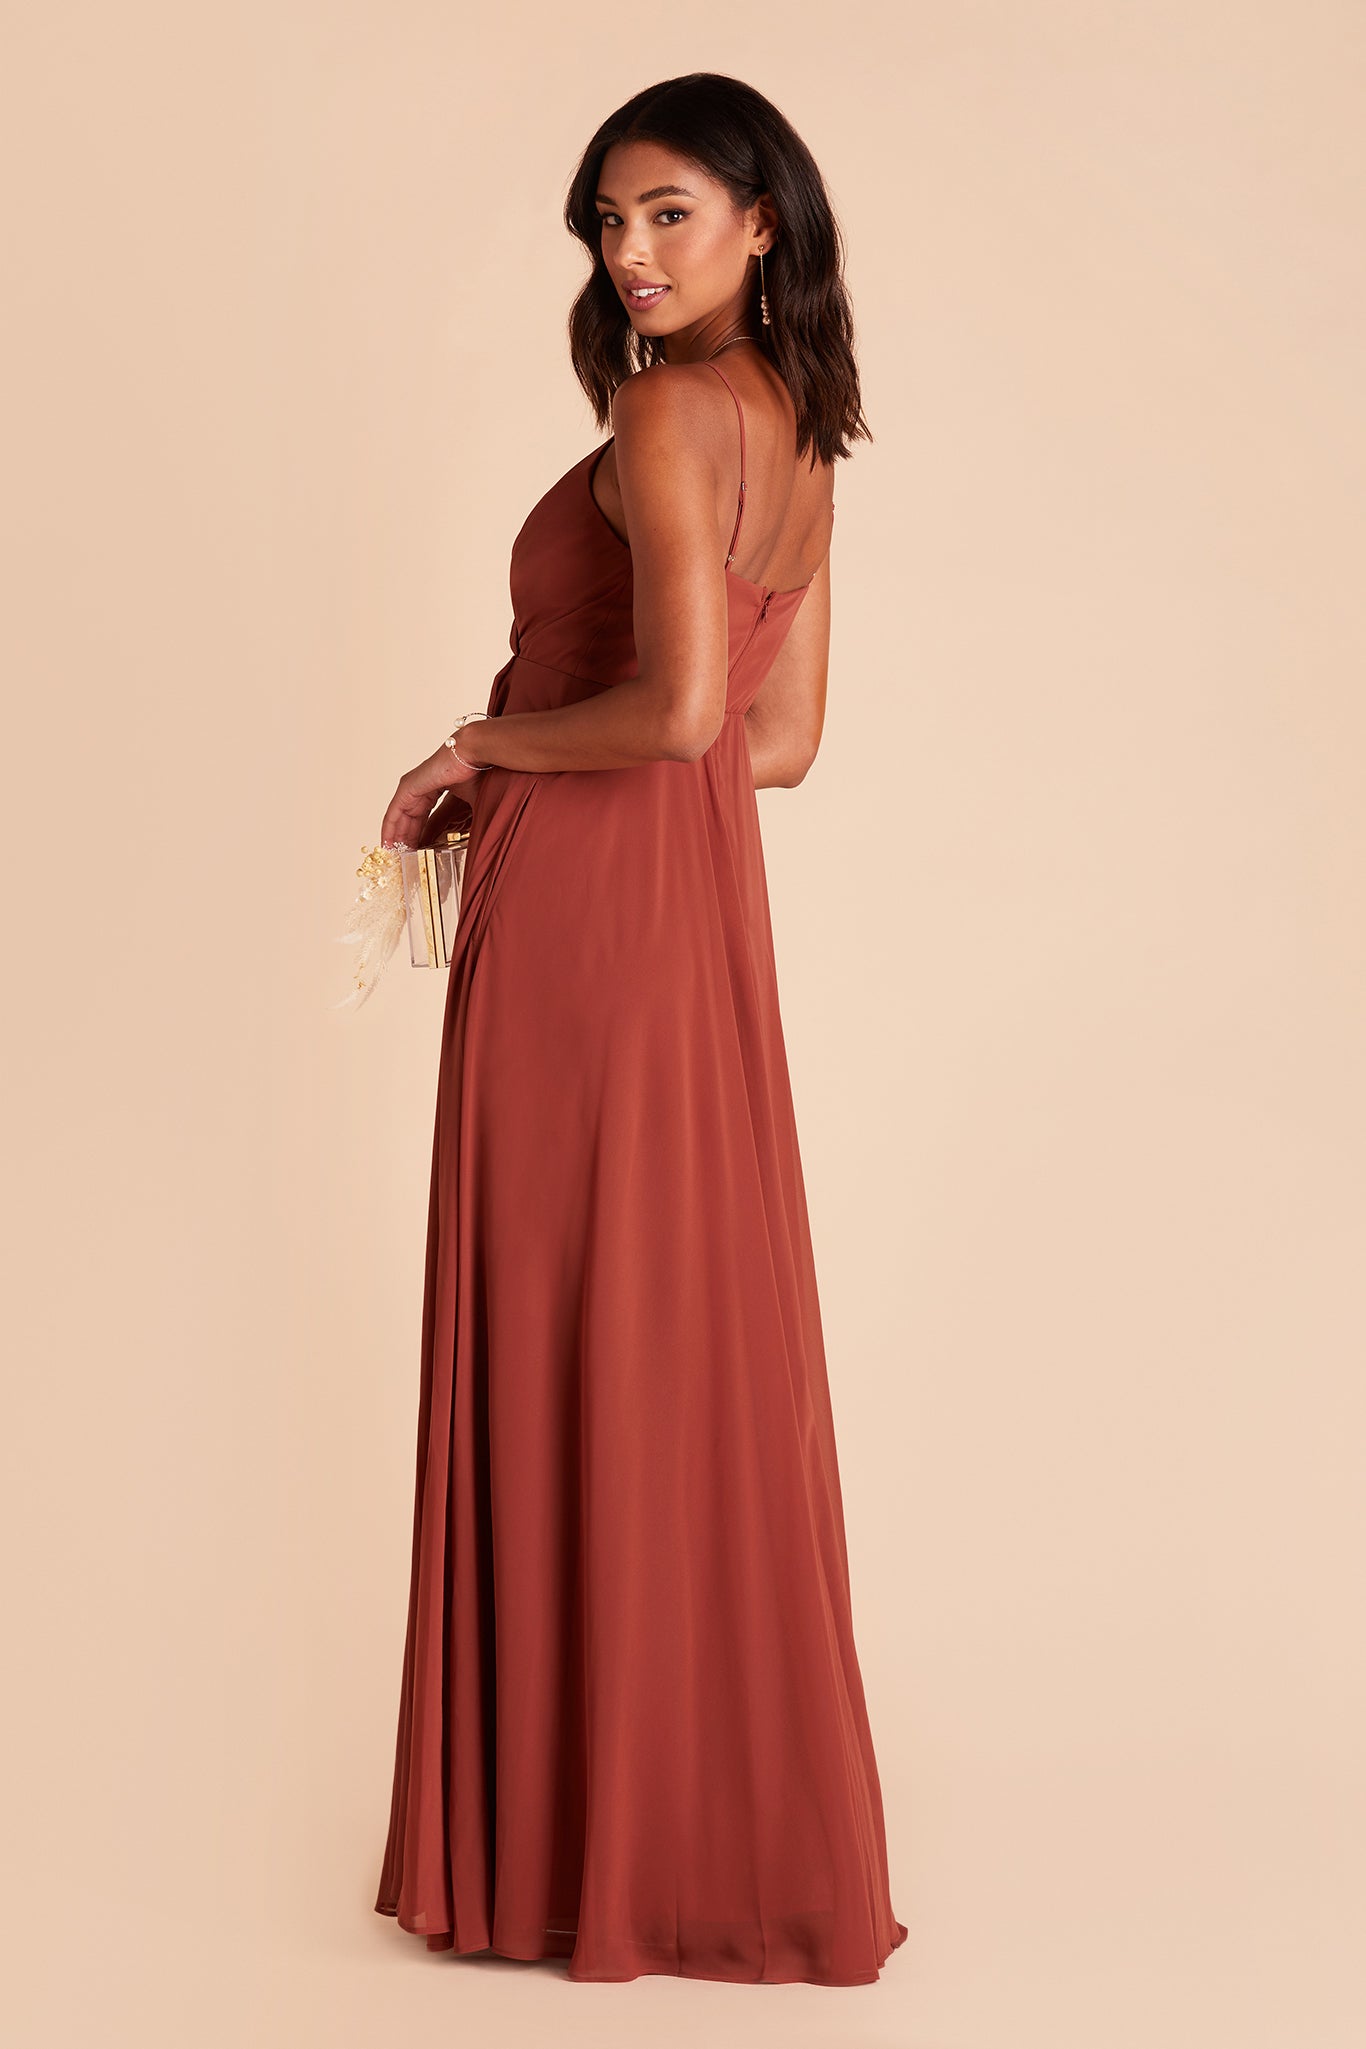 Kaia bridesmaid dress with pocket in spice chiffon by Birdy Grey, back view